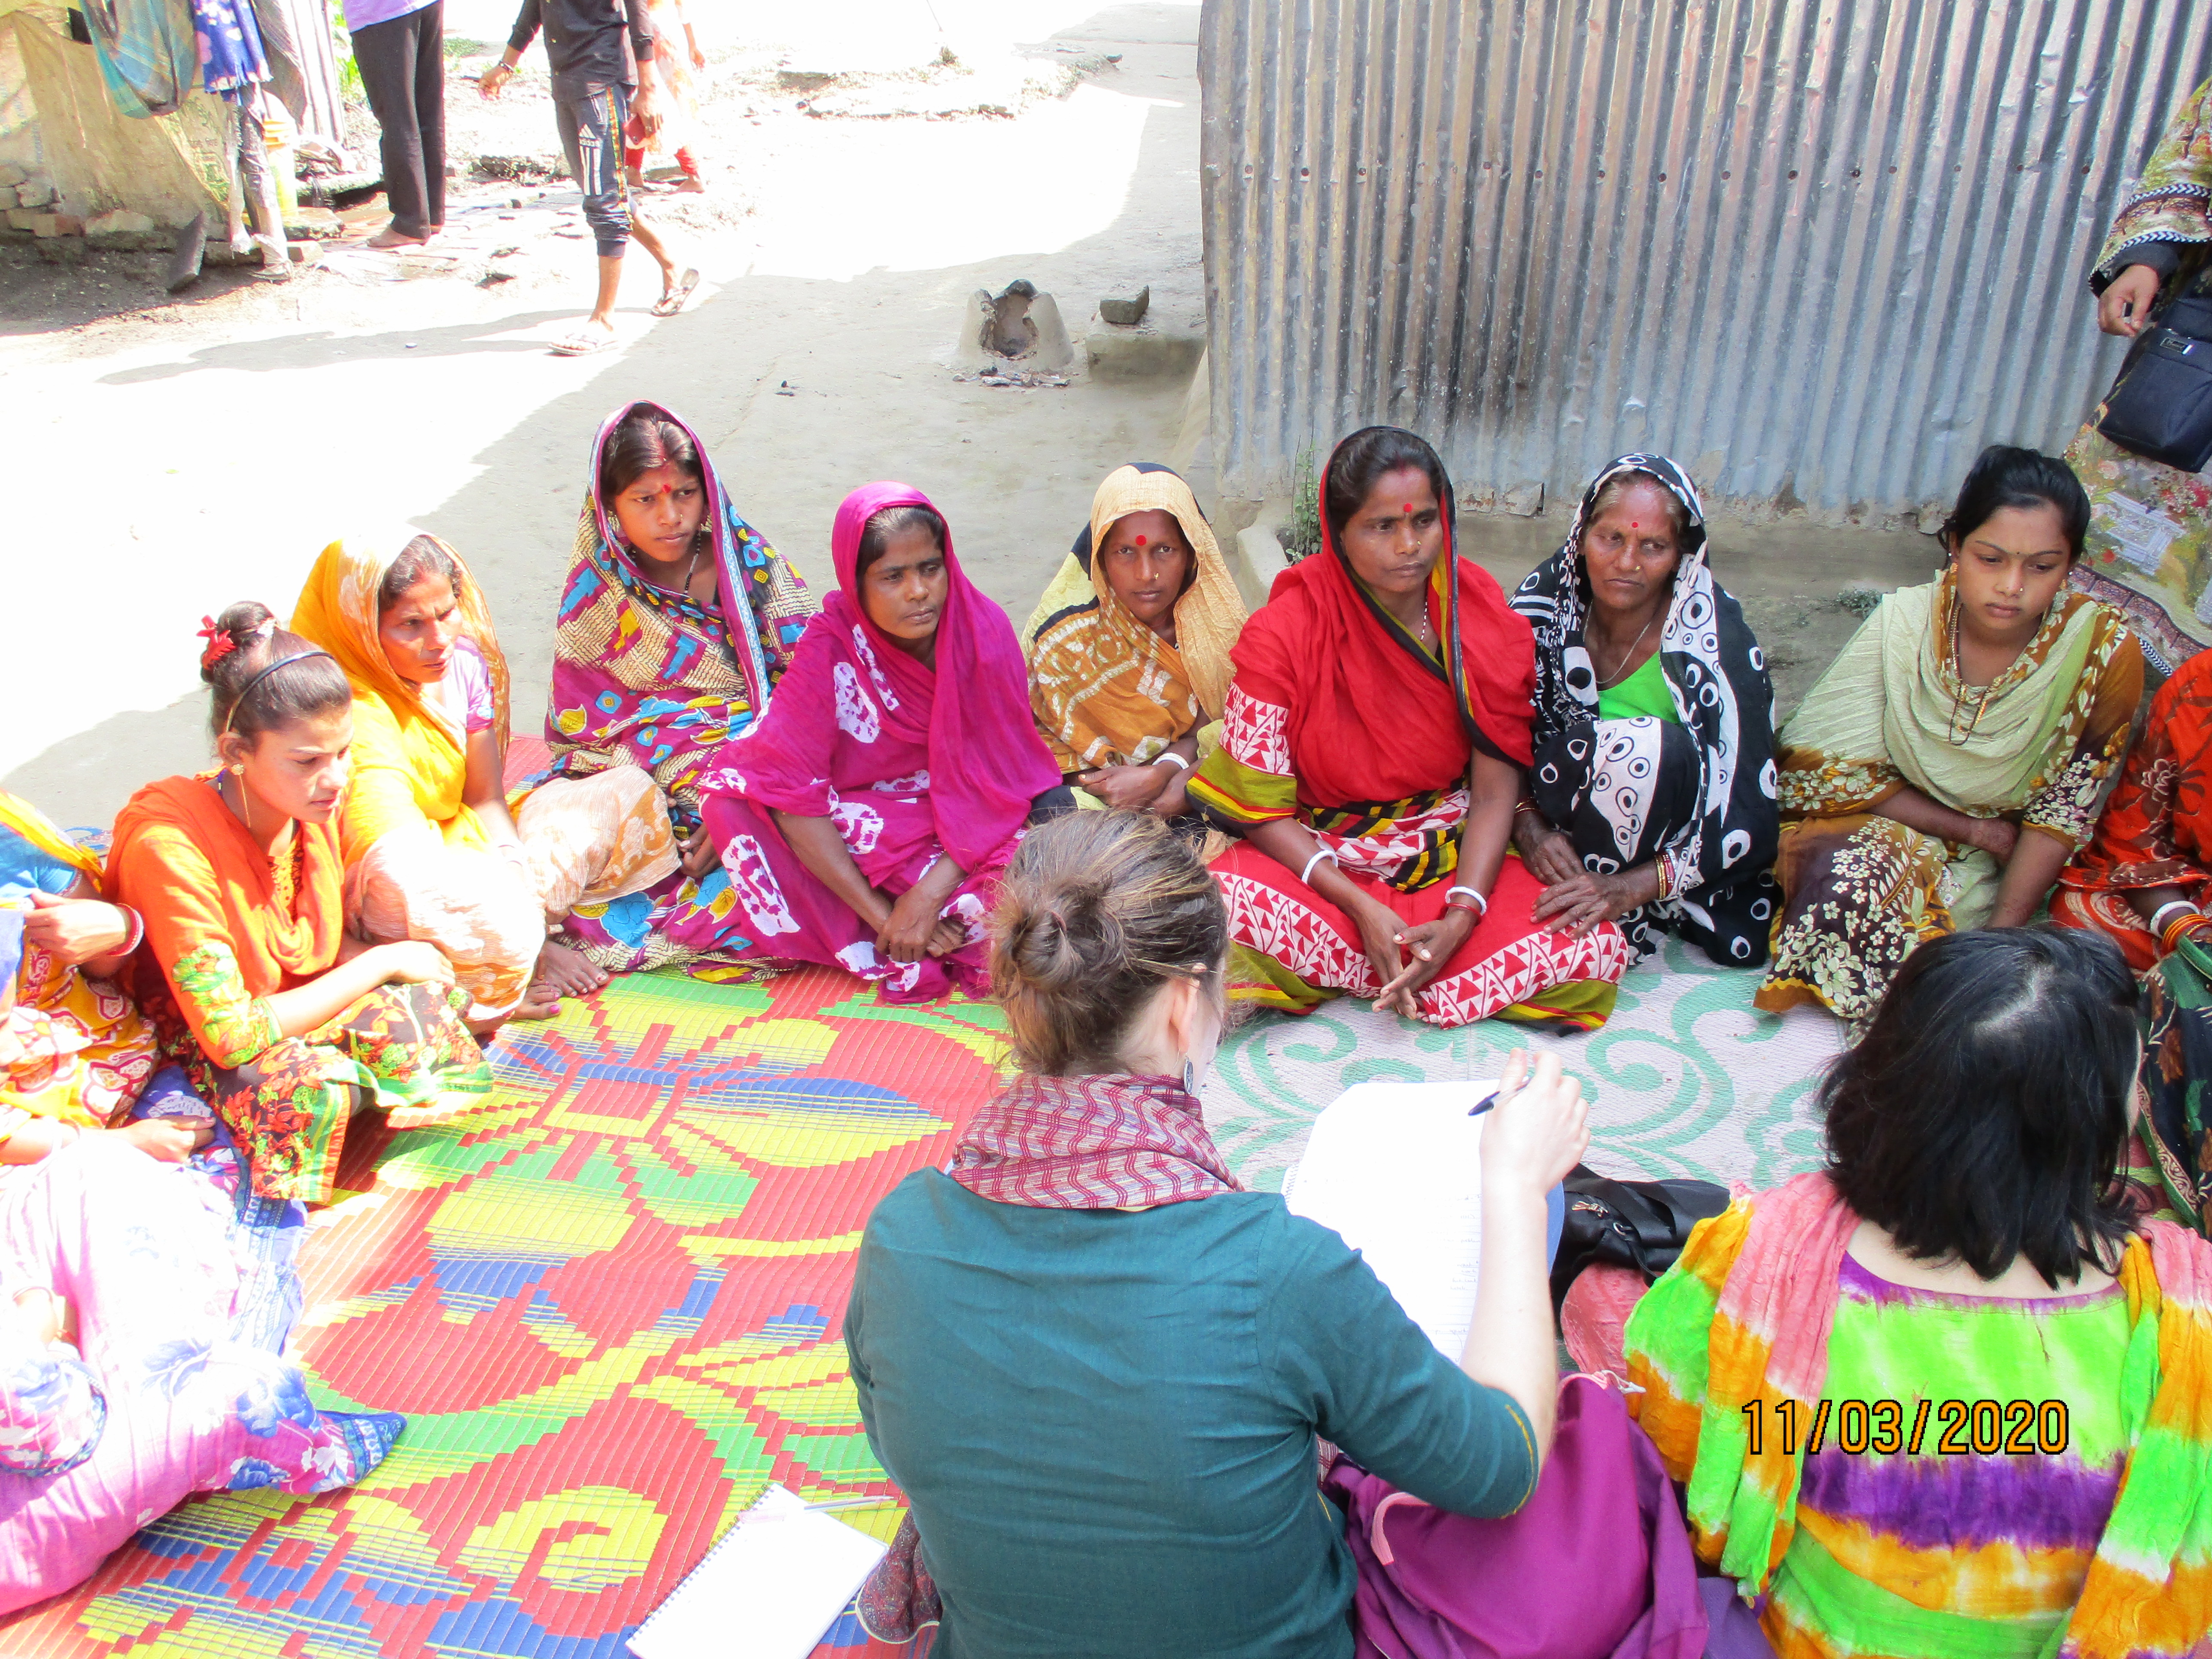 A group of women discussing livelihood challenges with the research team in Thakurgaon, Bangladesh.